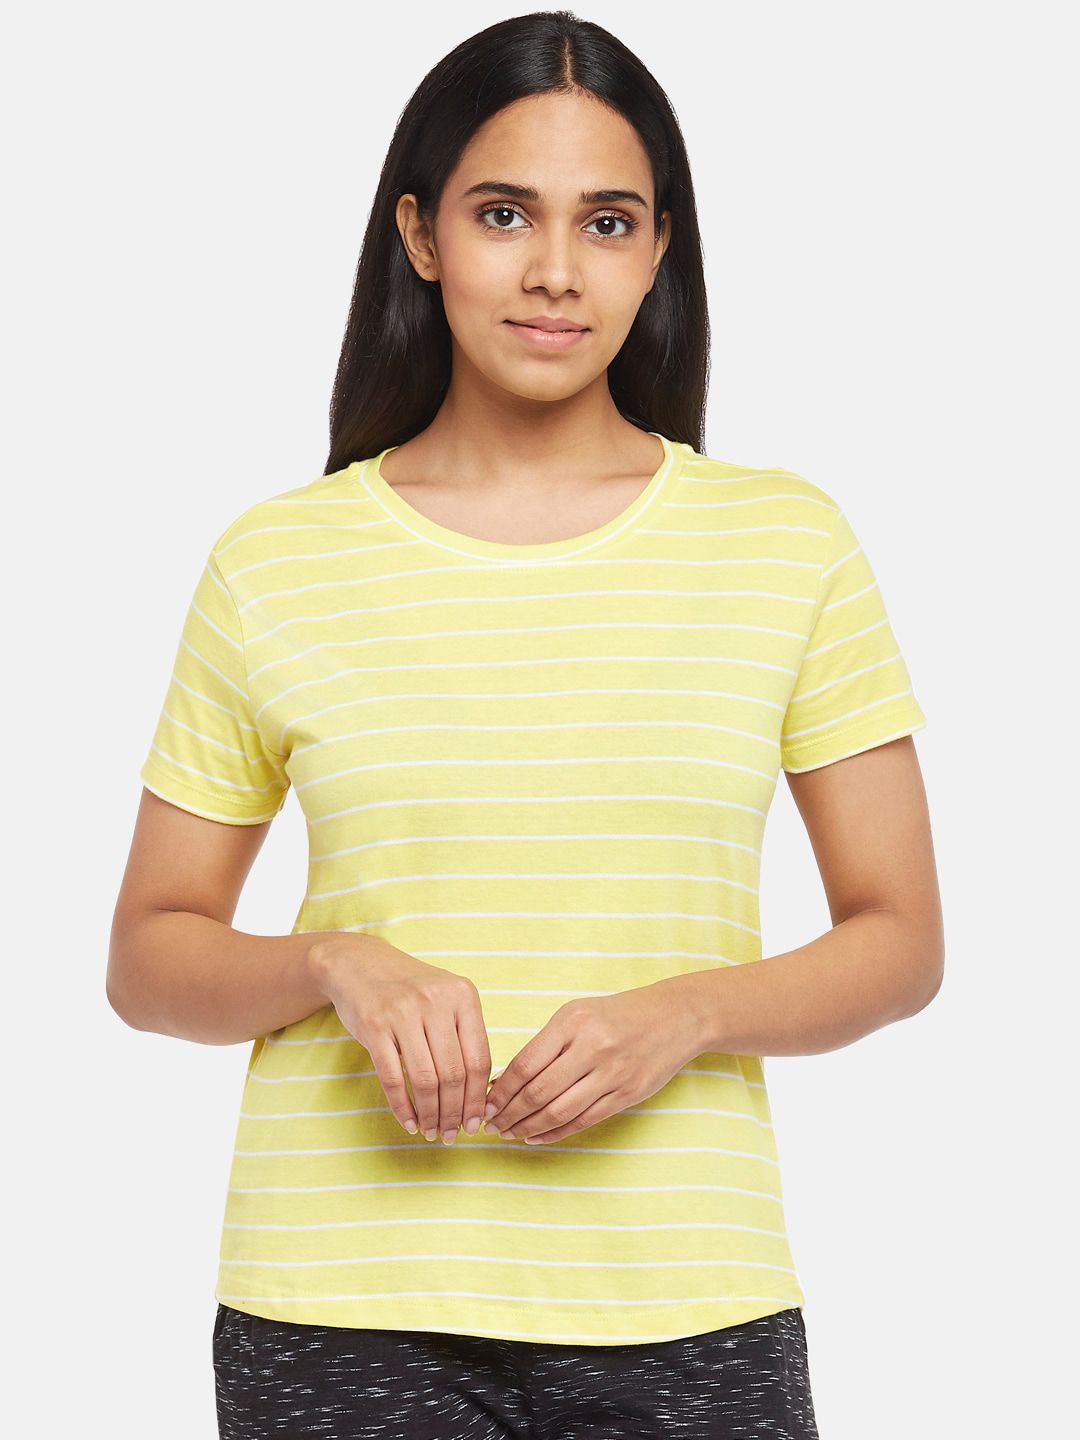 Dreamz by Pantaloons Yellow & White Striped Cotton Lounge T-shirt Price in India